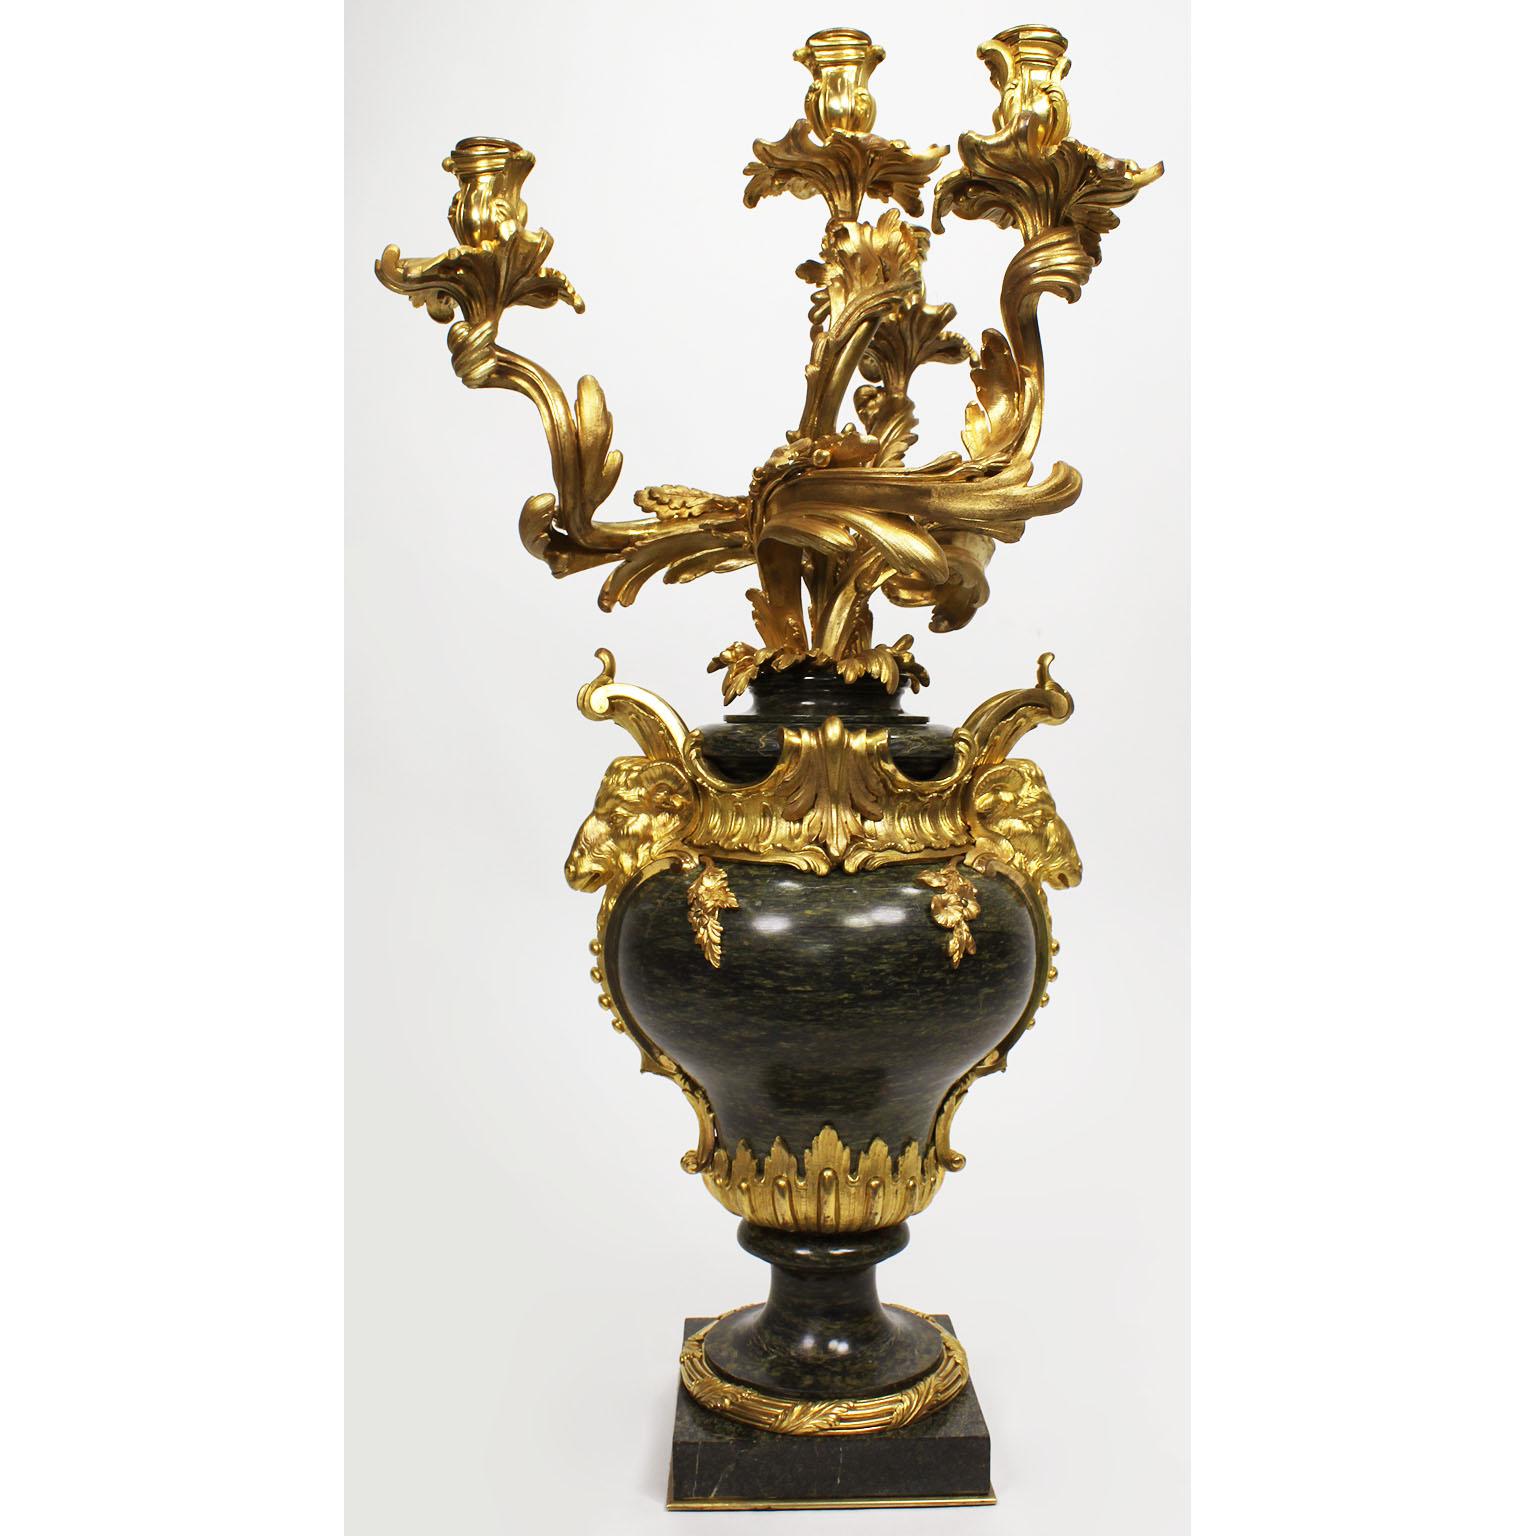 A very fine and palatial pair of French 19th century Louis XV style marble and gilt bronze mounted four-light figural candelabra by Henri Vian, (French, 1860-1905). The ovoid marble urn base surmounted with ormolu mounts of Royal Ram heads, flowers